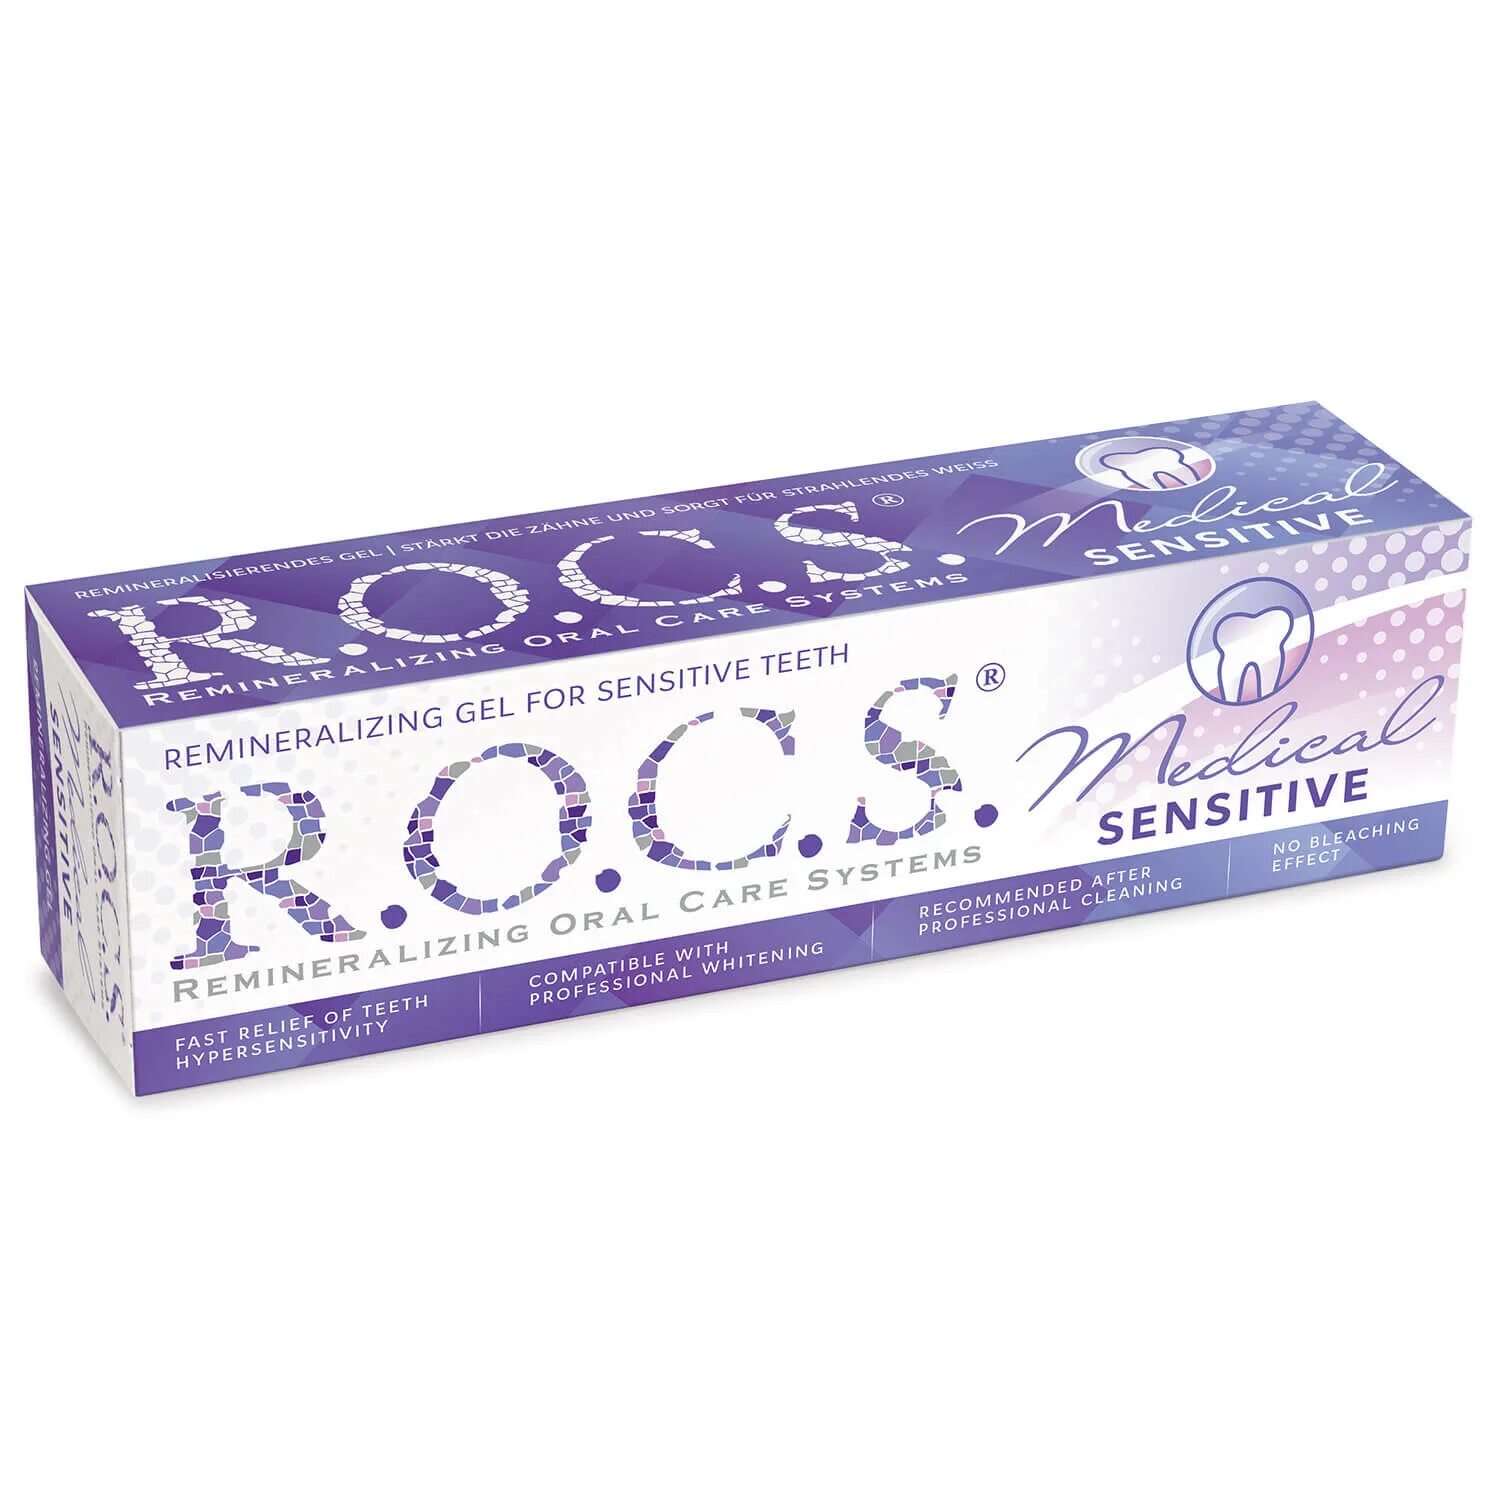 R.O.C.S. Medical Minerals Сенситив, 45 г. R.O.C.S (Рокс) гель Медикал минералс 45г. Рокс Медикал Сенситив гель. Rocs Mineral sensitive гель. R o c s minerals